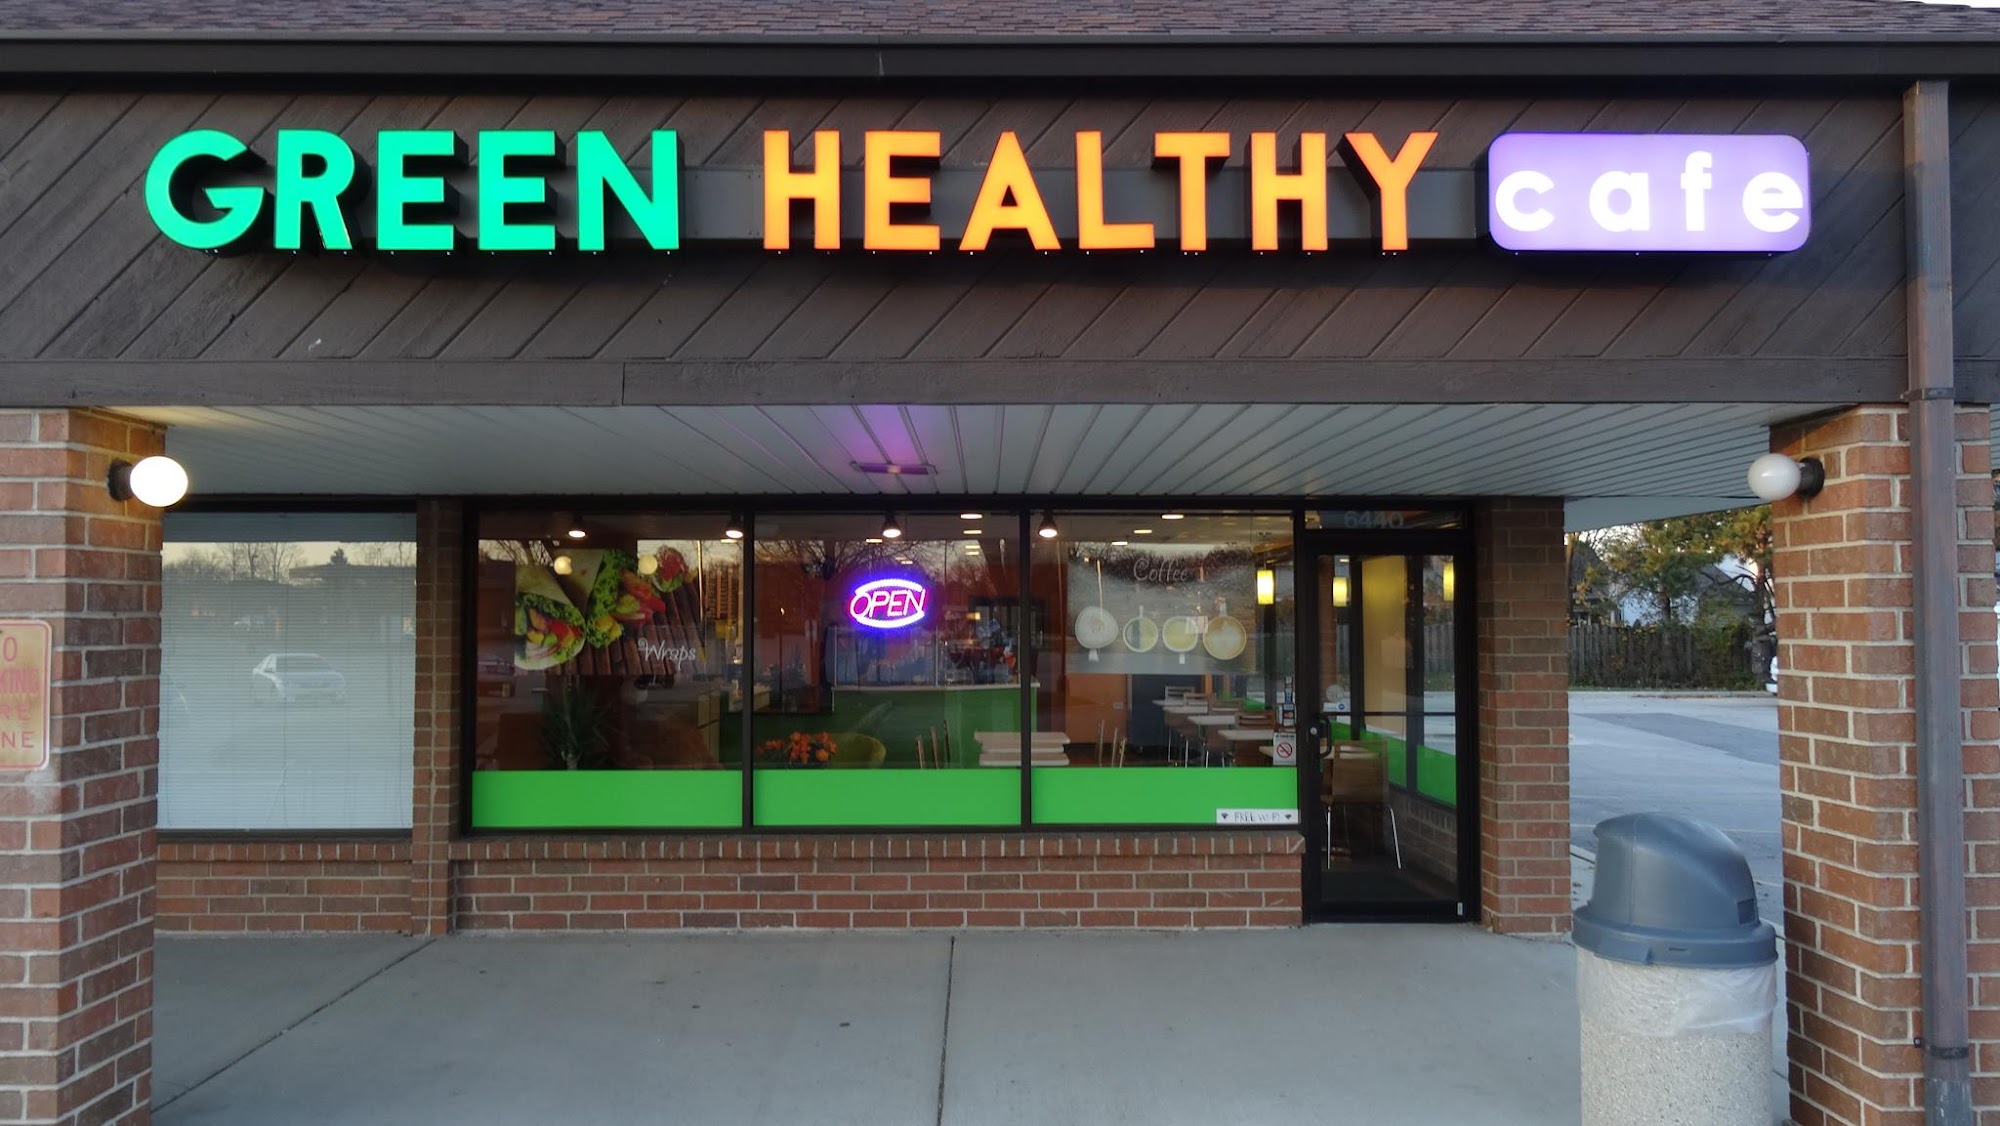 Green Healthy Cafe